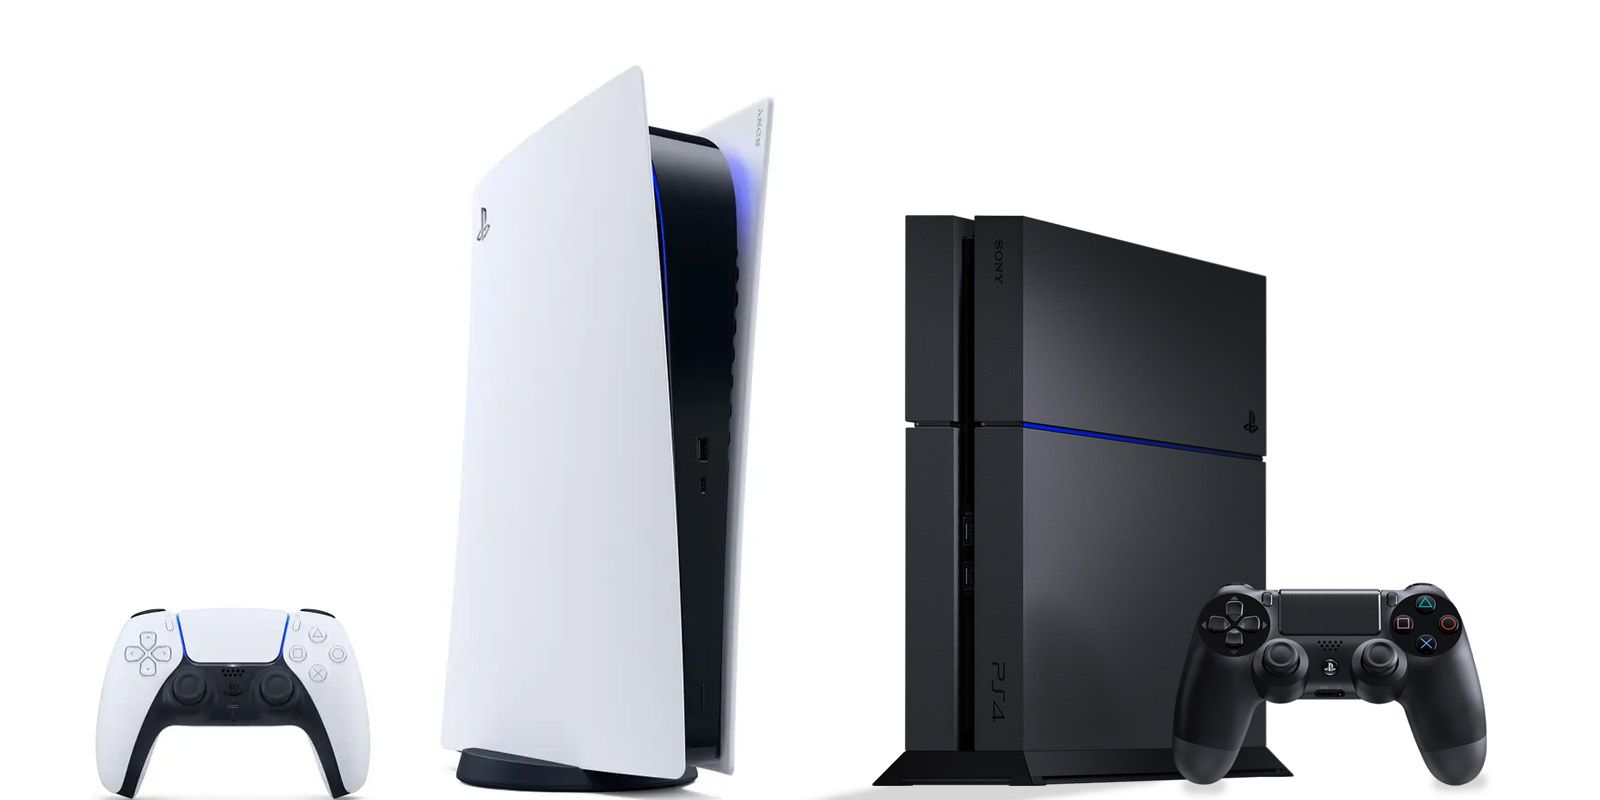 will ps4 still get games after ps5